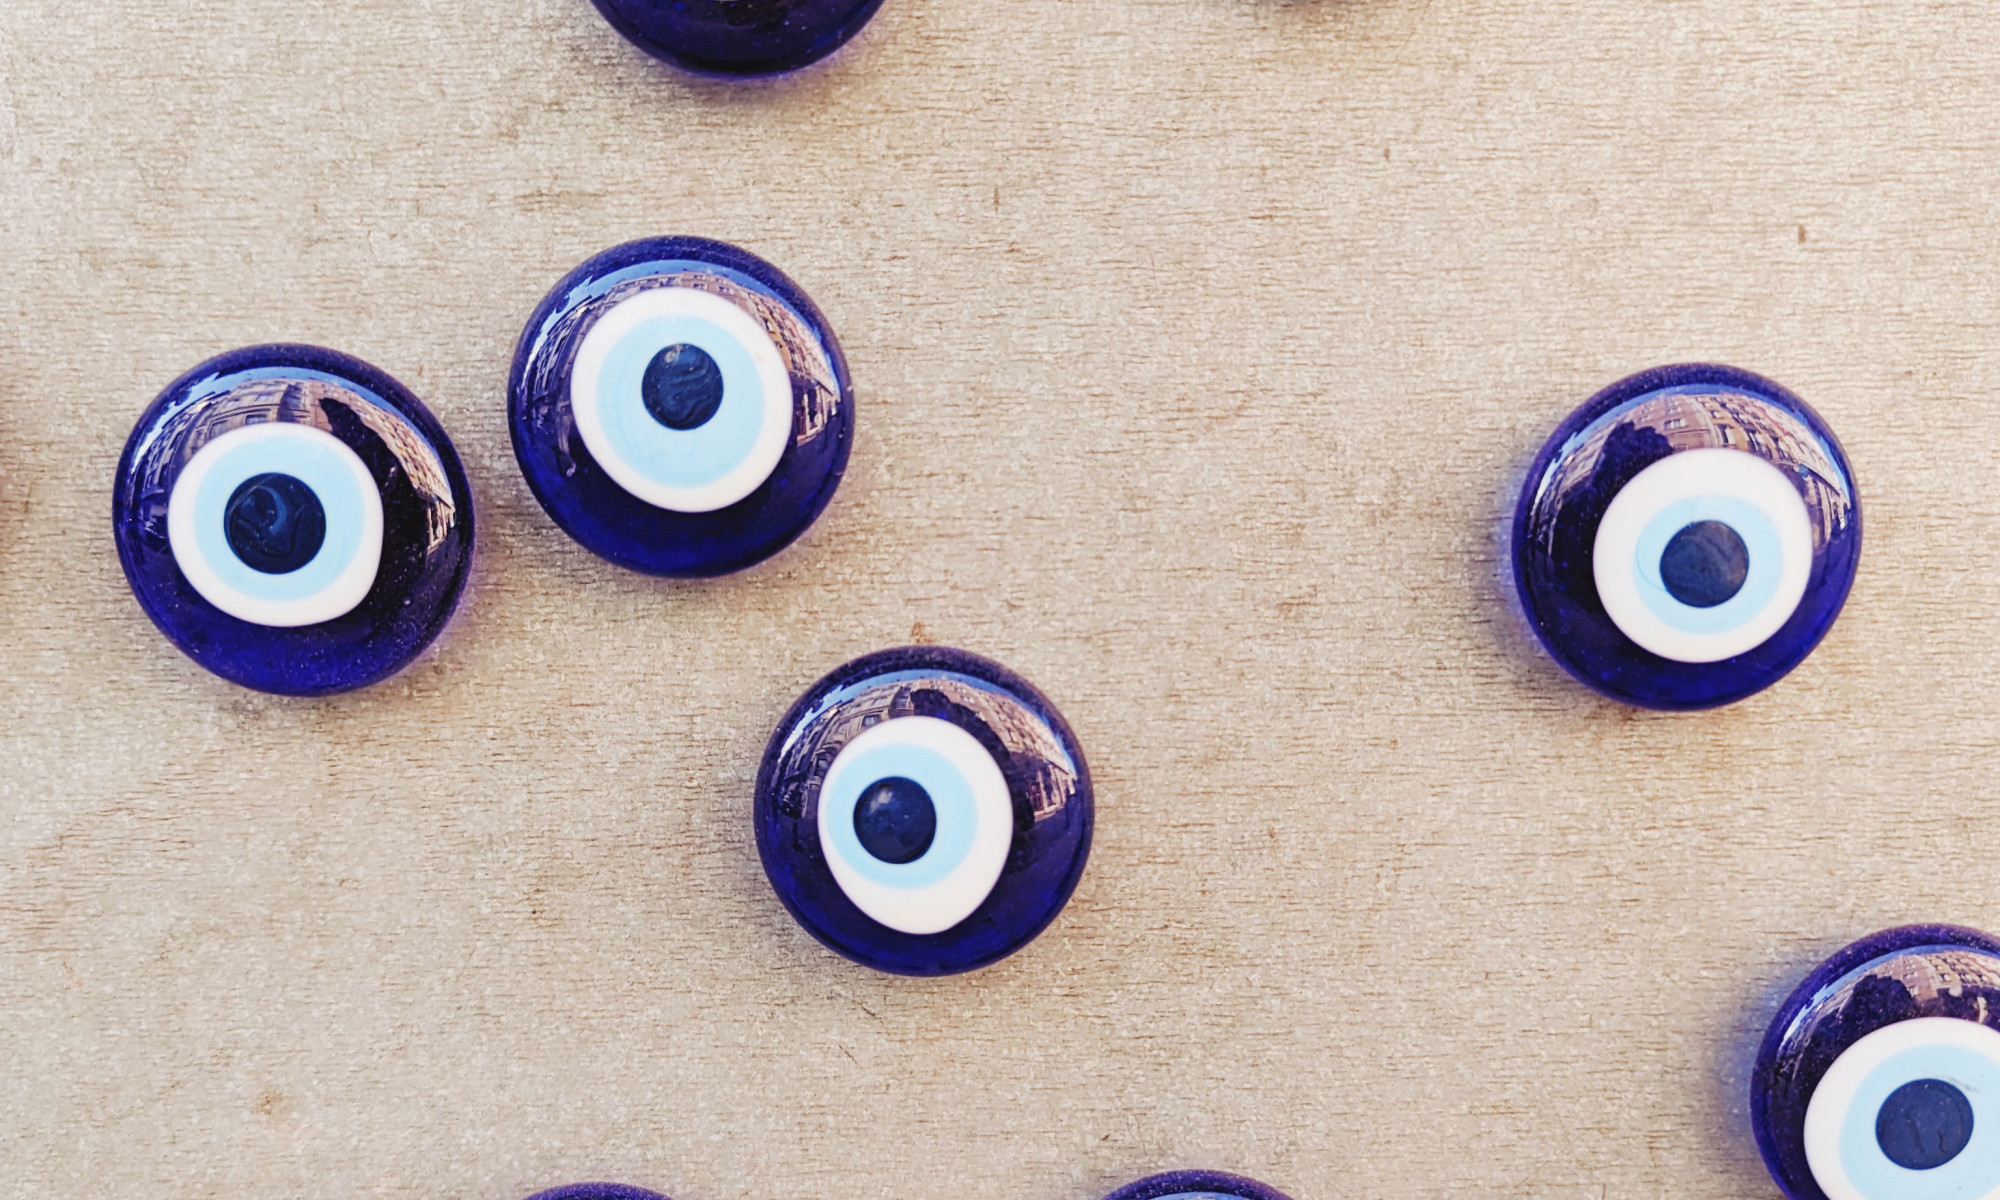 What is the evil eye used for?